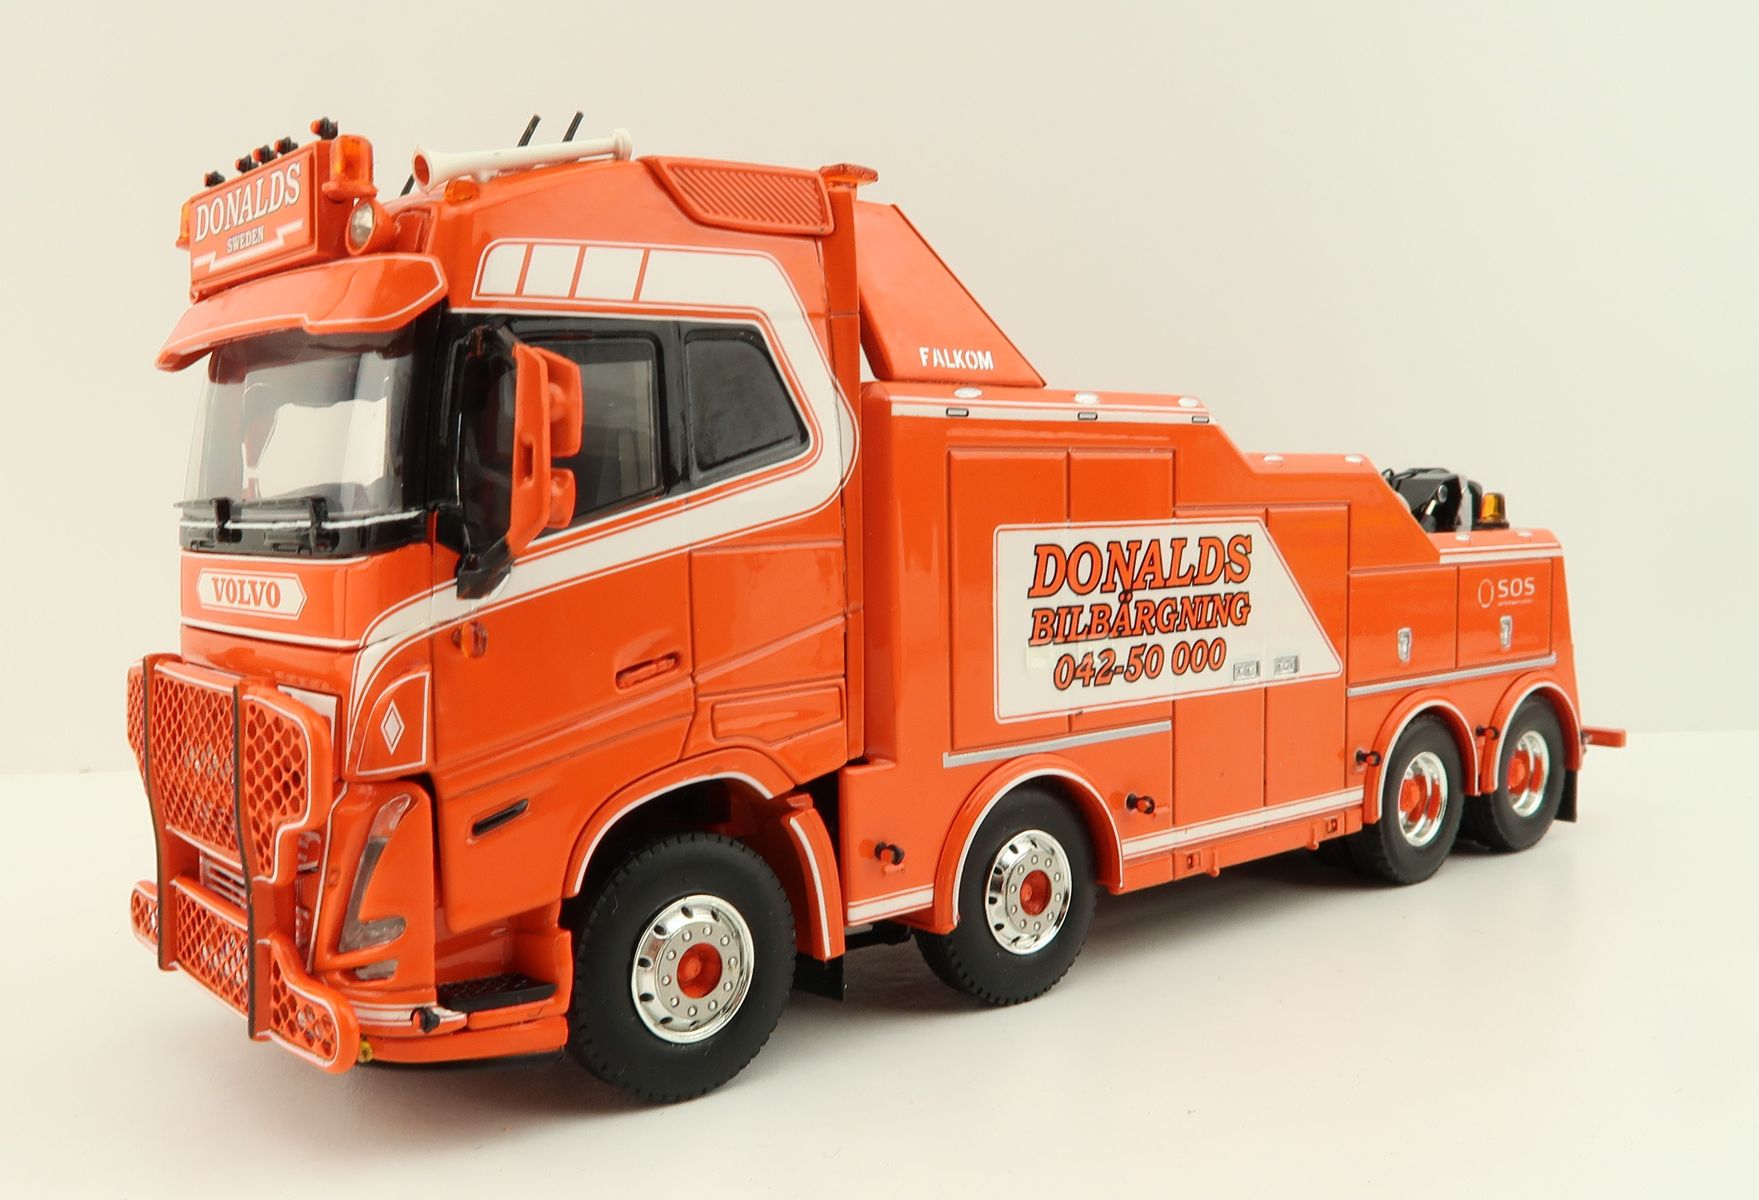 Product Image - WSI 01-3872 Volvo FH5 Globetrotter XL 8x4 Falkom Wrecker Truck - Donald's Bilbargning - Scale 1:50